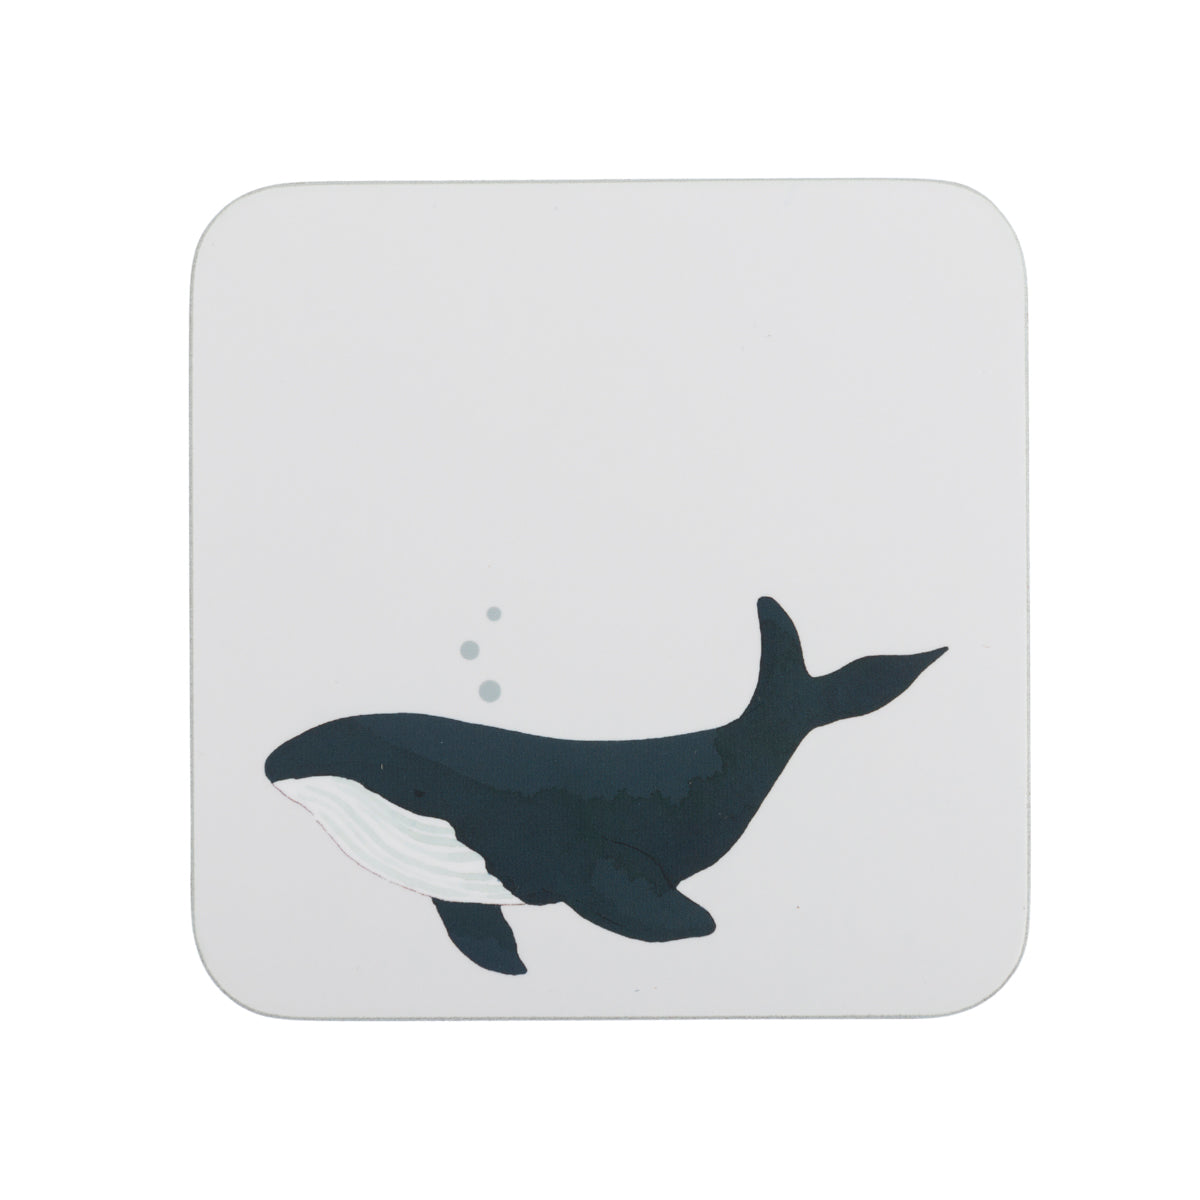 Whales Cork Coasters (Set of 4) by Sophie Allport